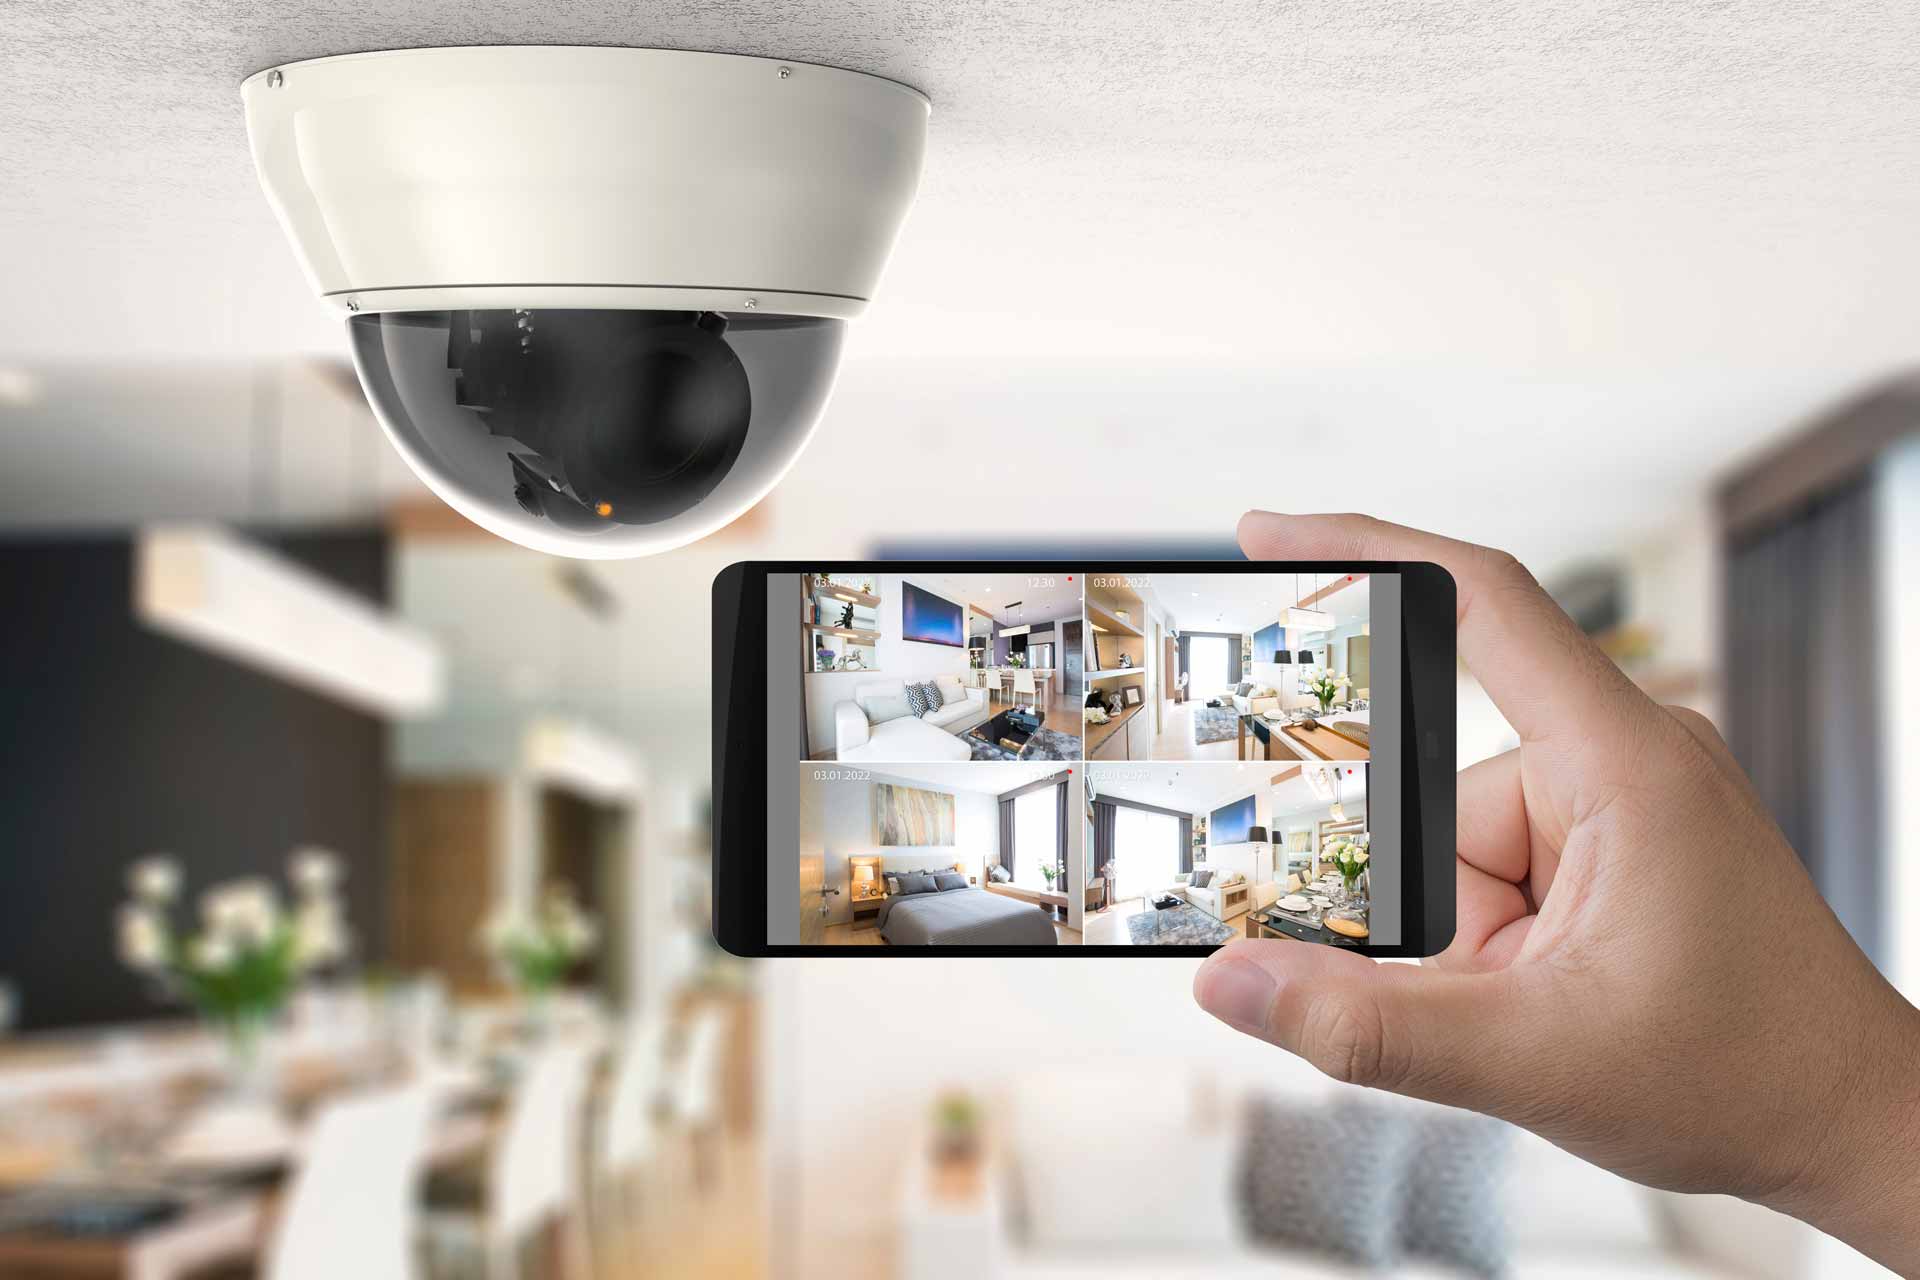 Home security camera with smartphone app